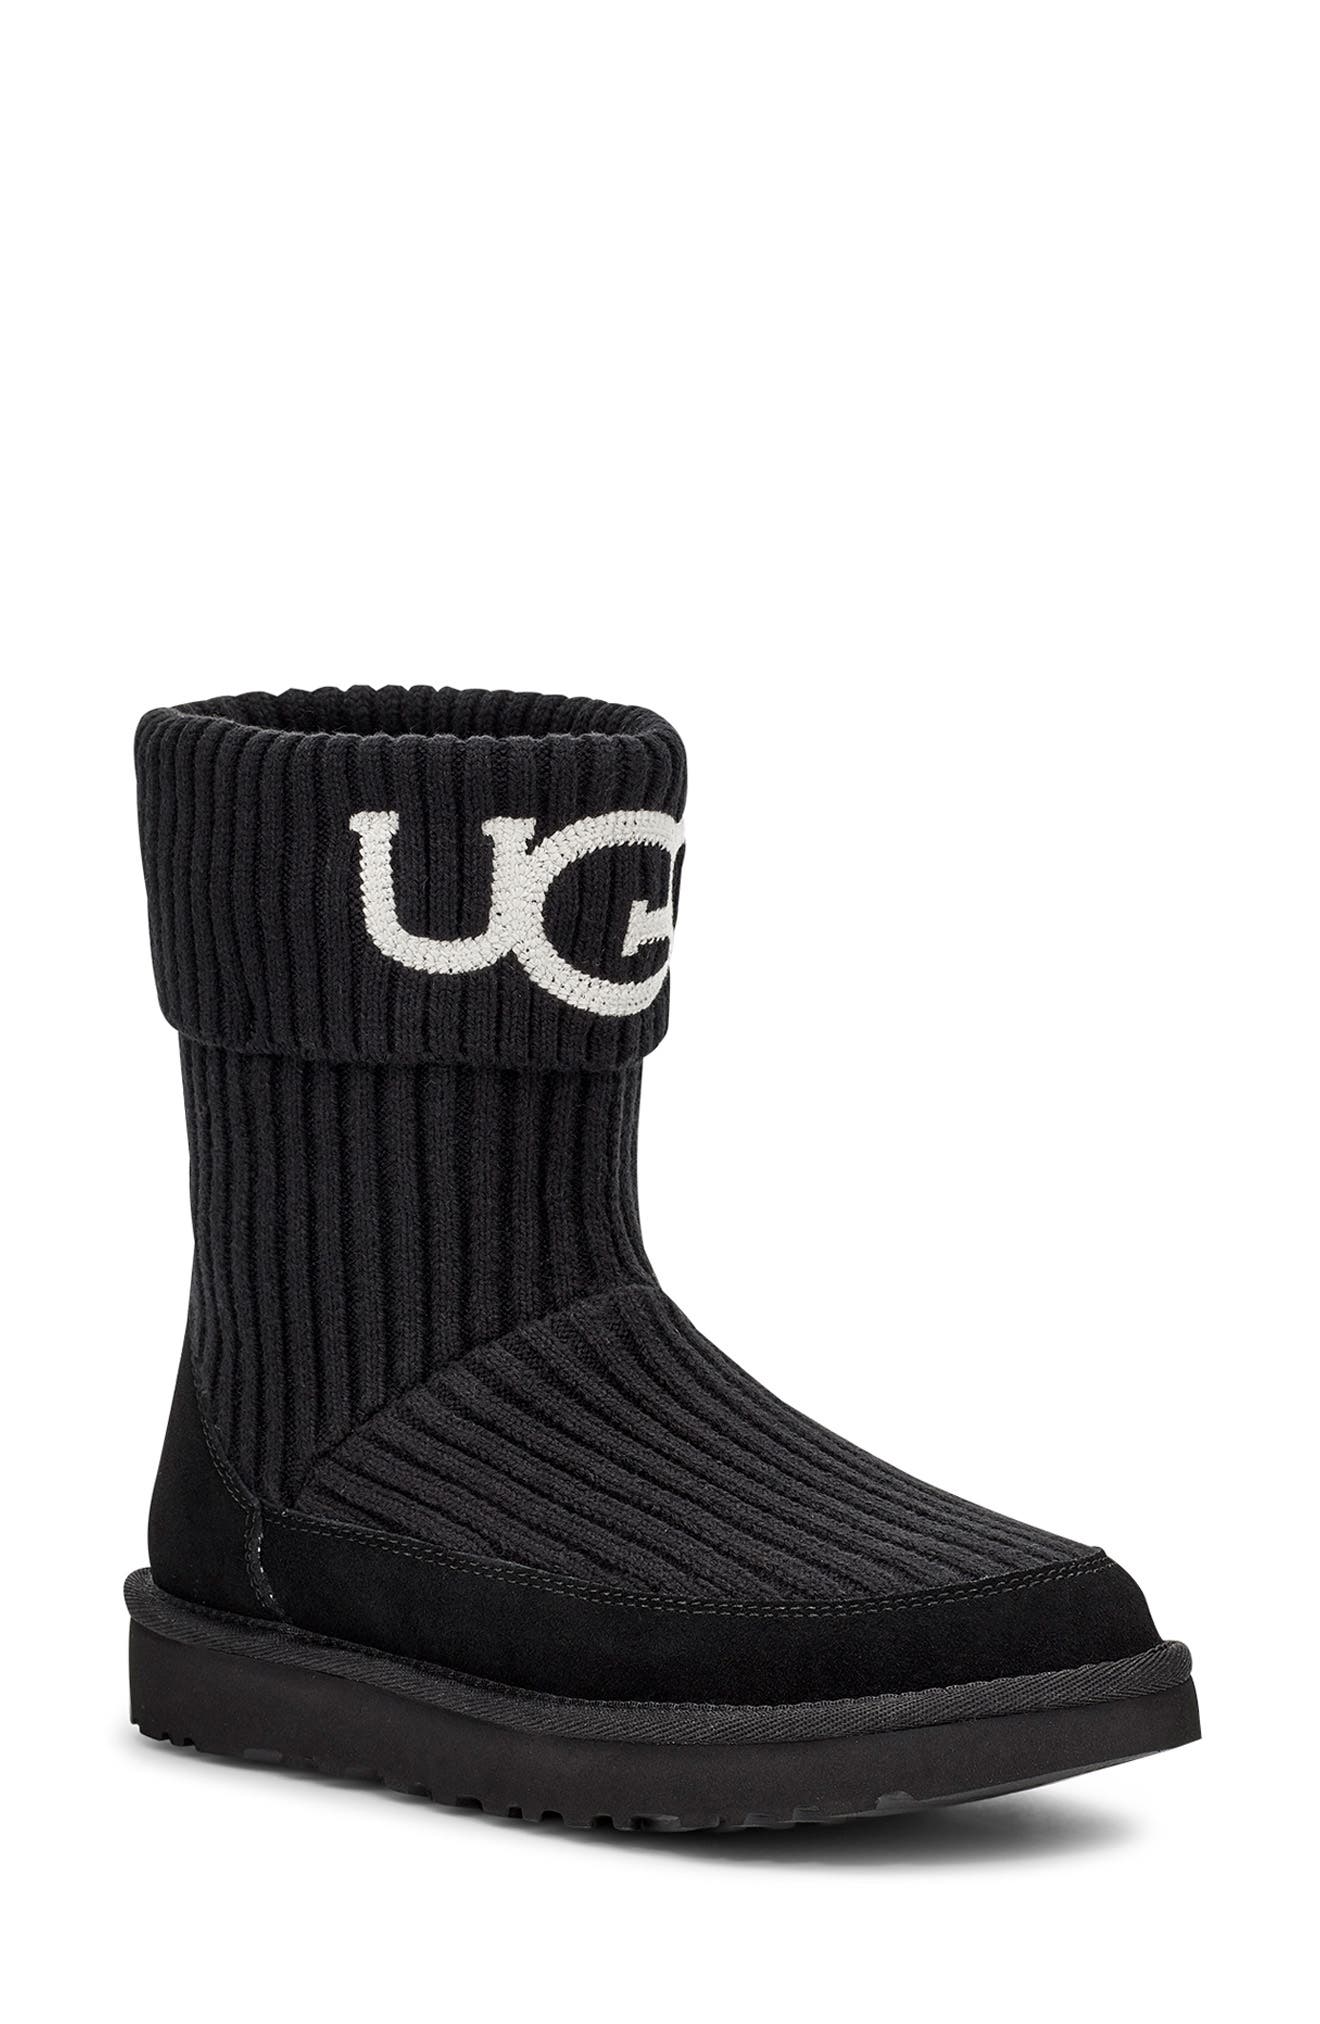 knitted ugg boots